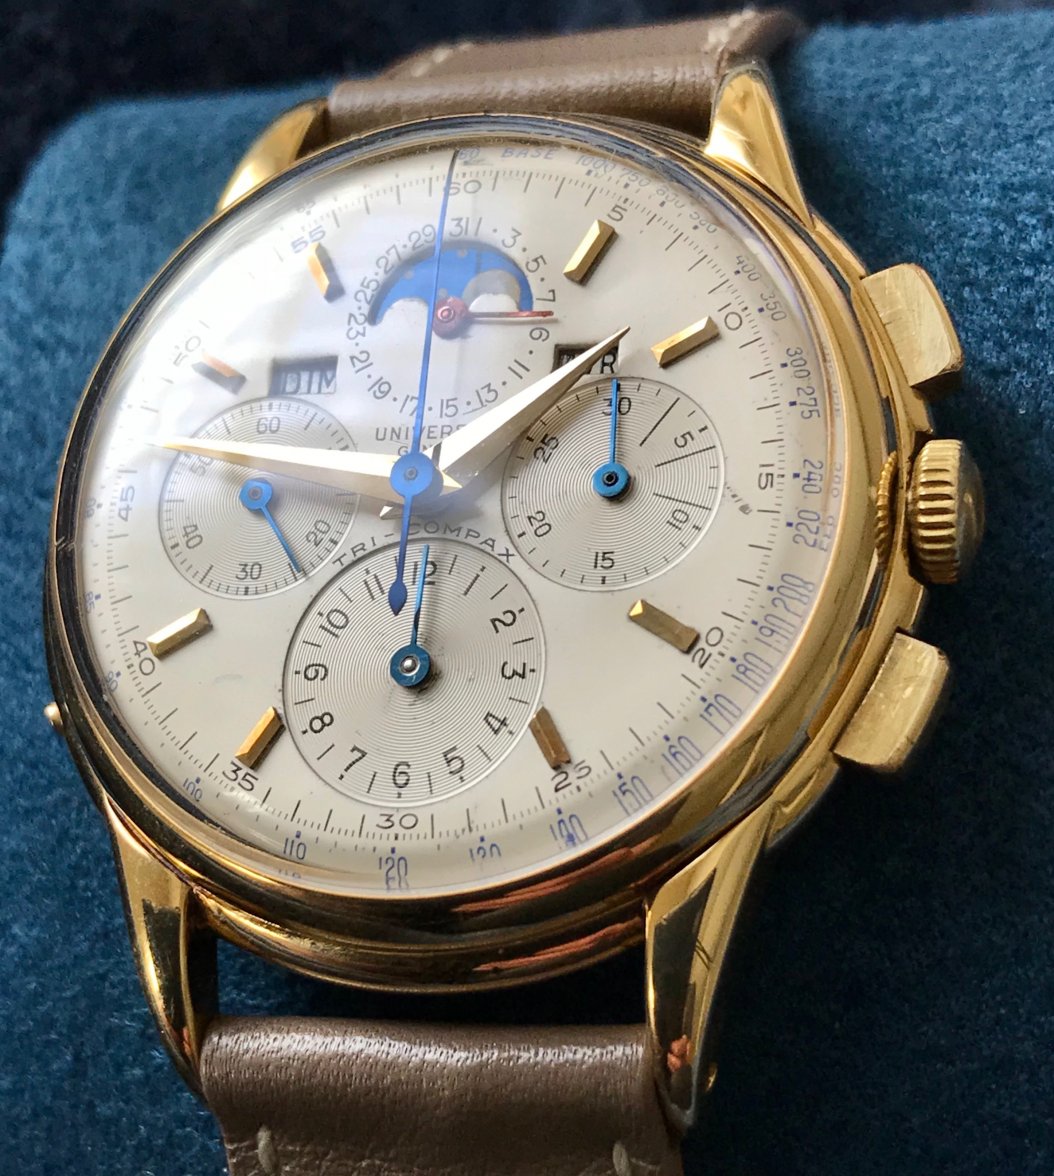 SOLD - Universal Geneve TRI-COMPAX, 18k Yellow Gold, Ref 12268 | Omega ...